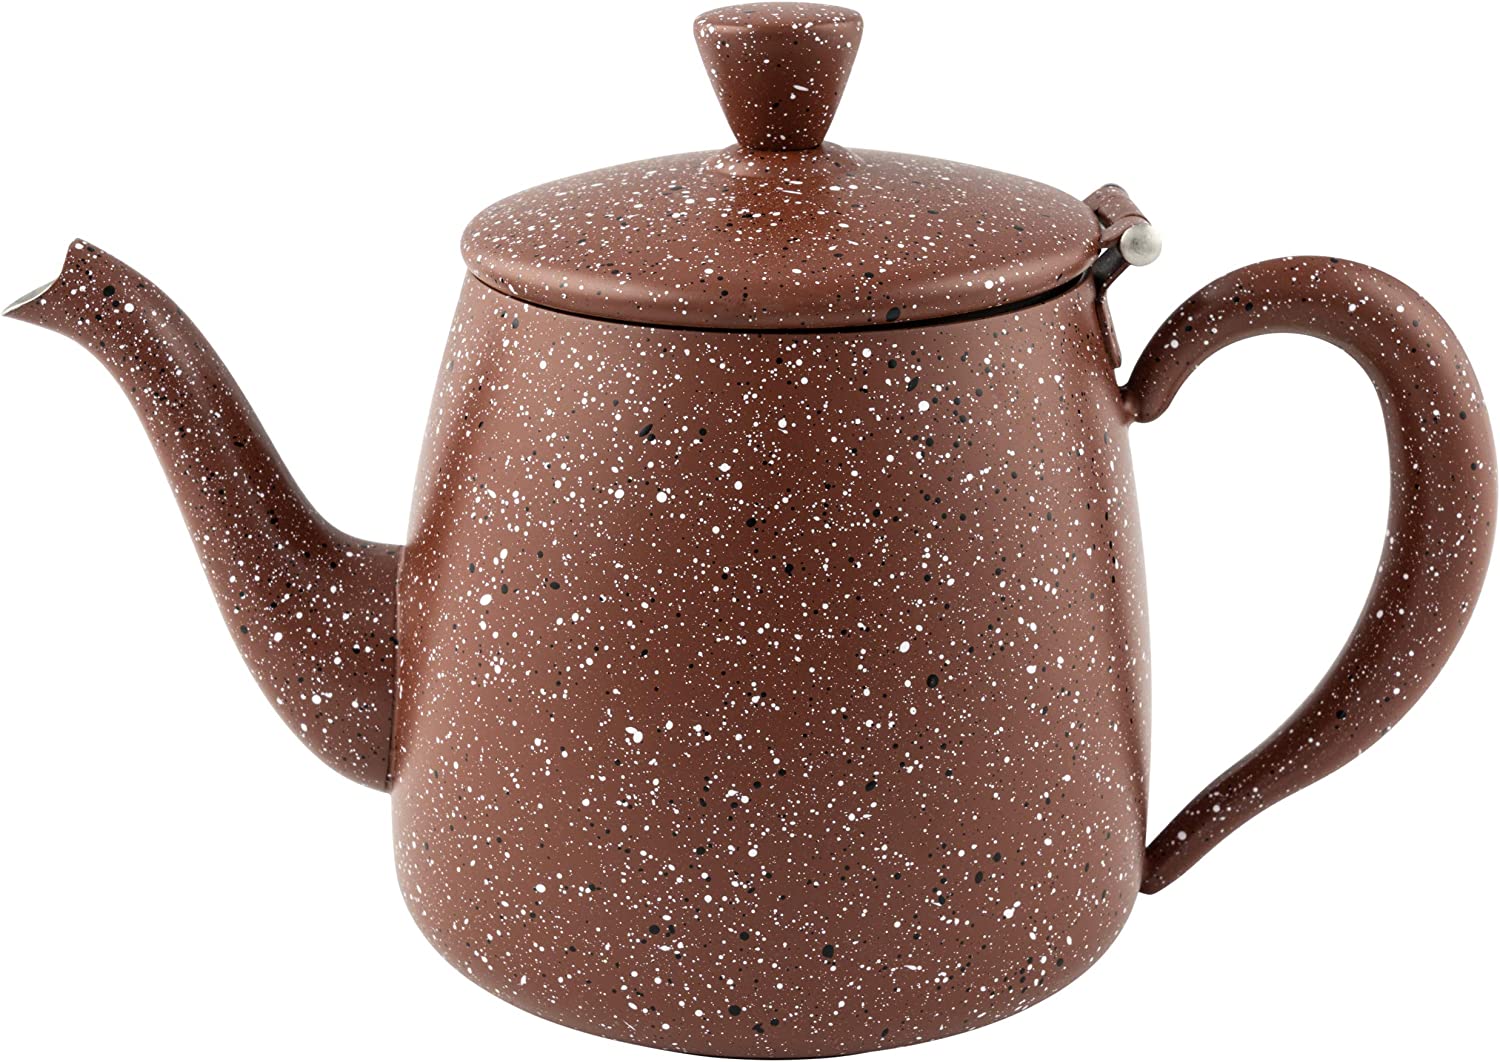 Cafe Ole Café Olé PT-048RG Premium 48oz 1.35L Teapot Made of High Quality Stainless Steel - Red Granite, Drip-Free Spout, Hollow Handles & Hinged Lid, 1.35 Litres